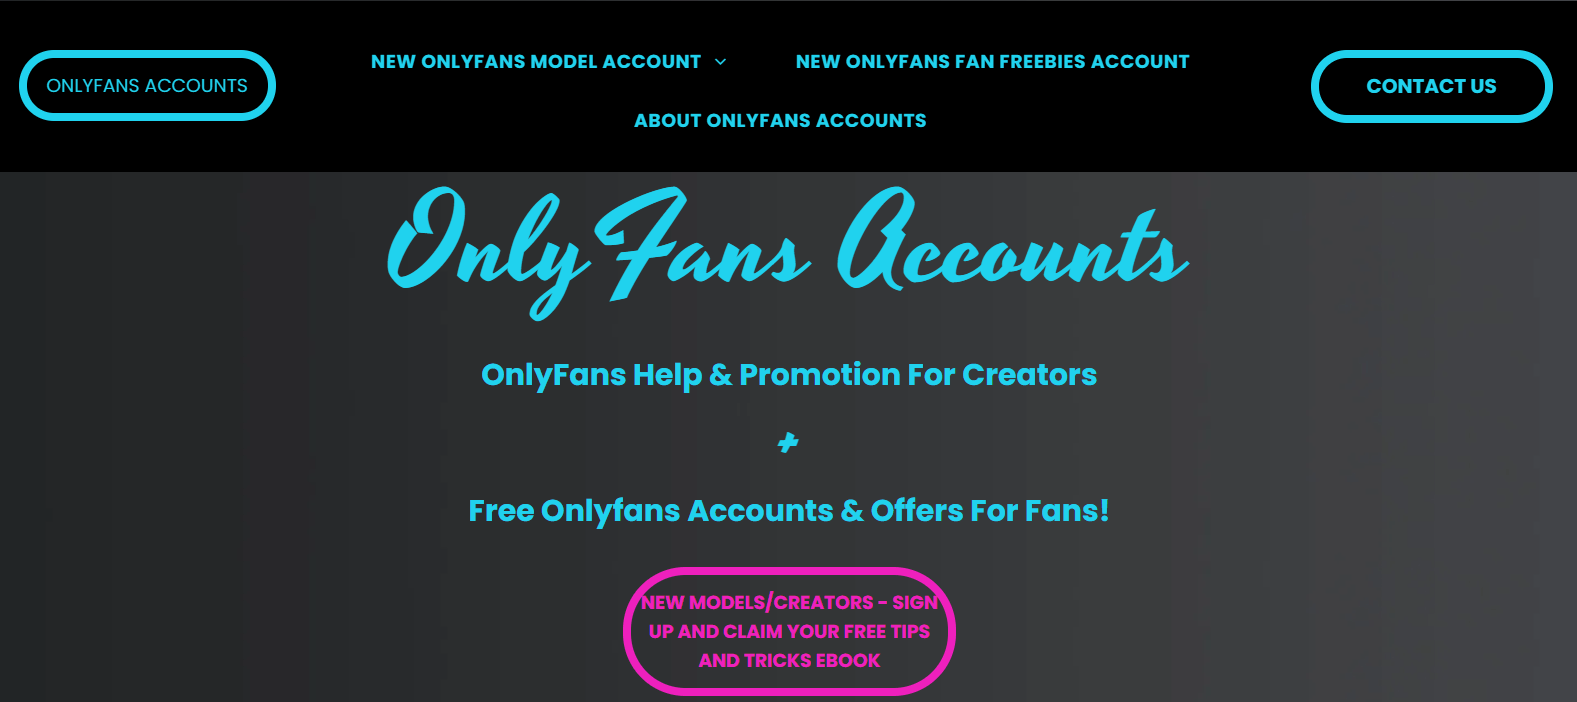 Onlyfans free passwords